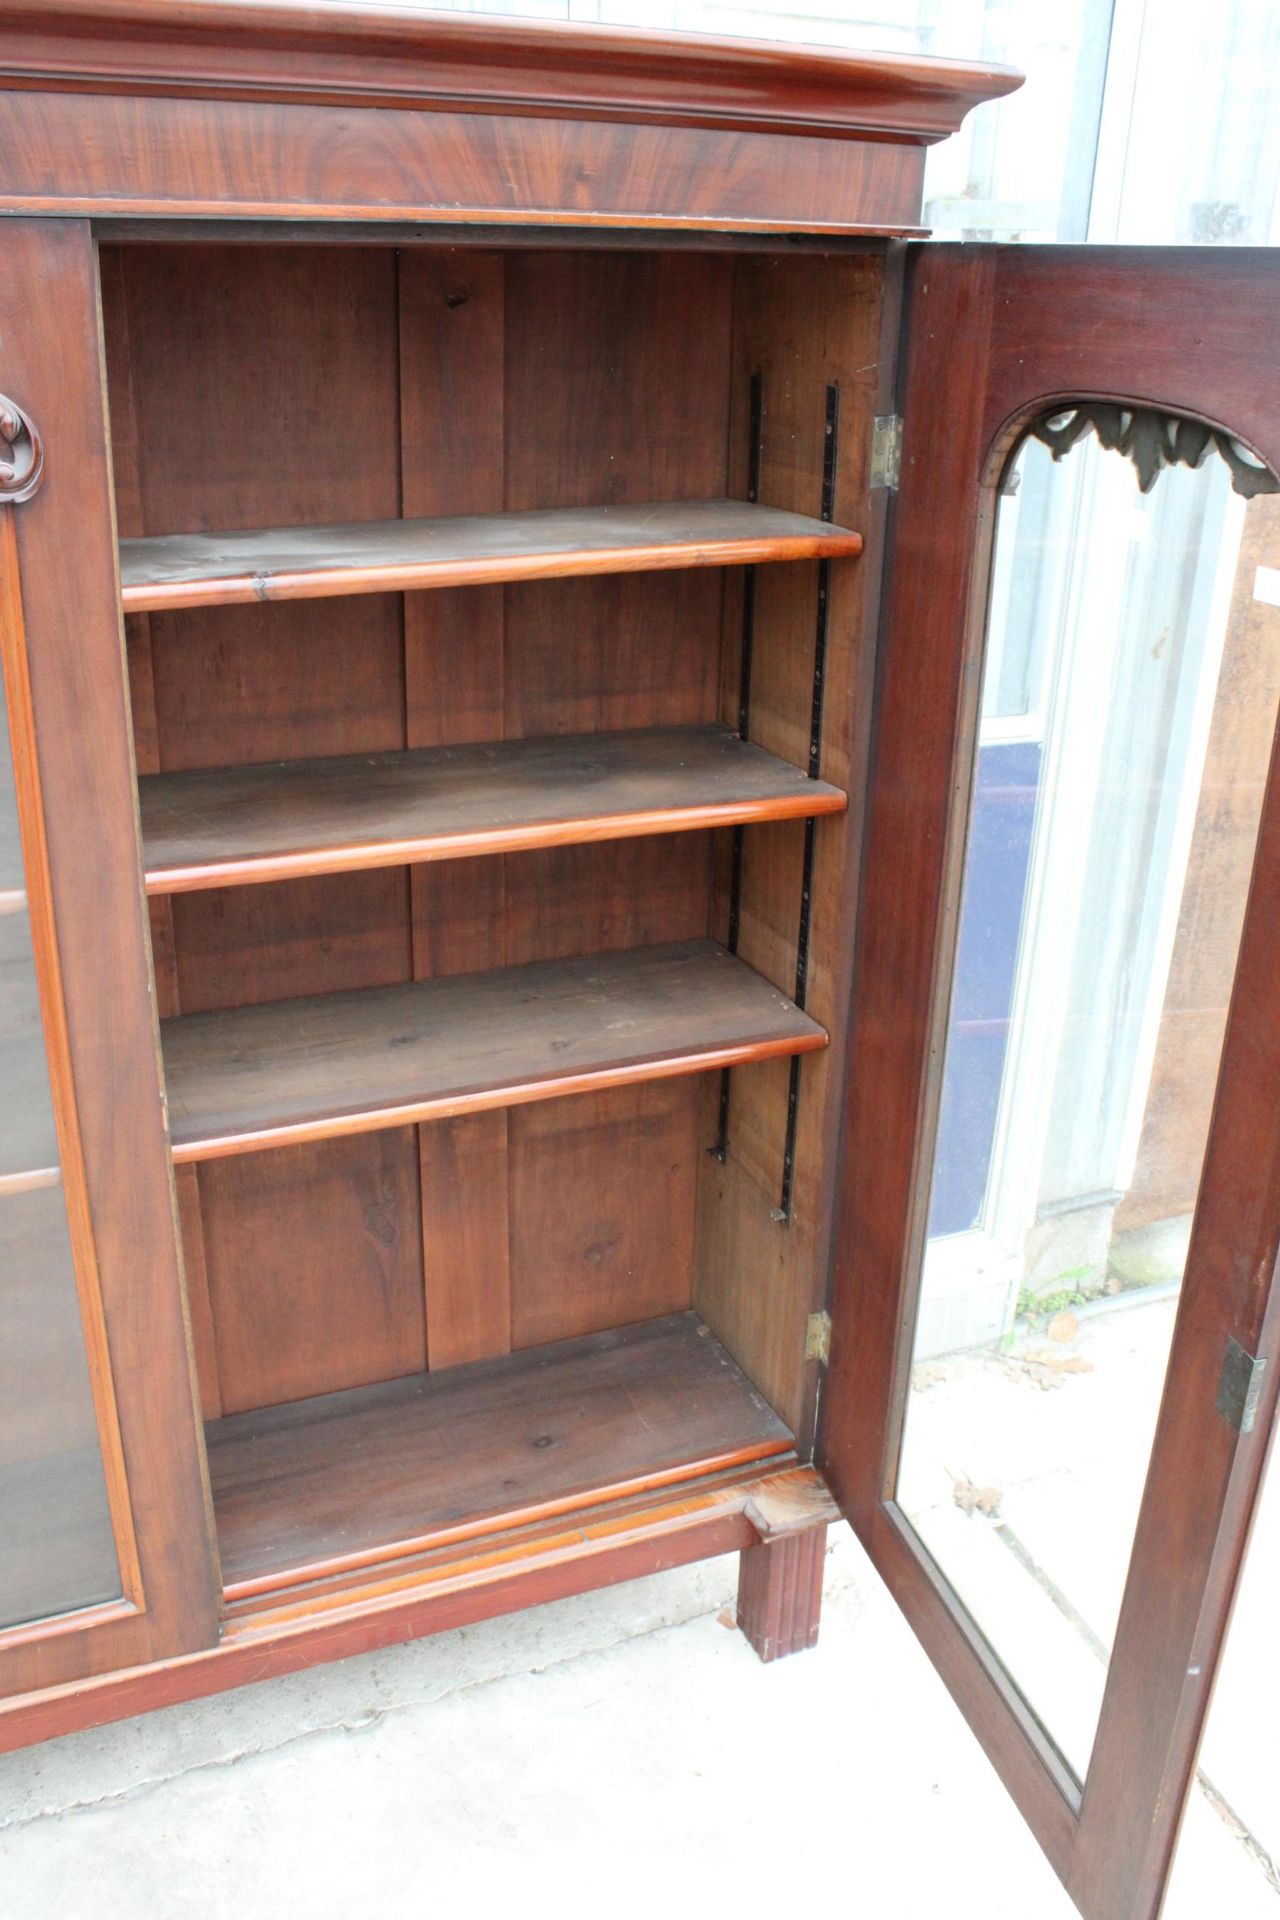 A VICTORIAN MAHOGANY TWO DOOR GLAZED BOOKCASE 59" WIDE - Image 4 of 5